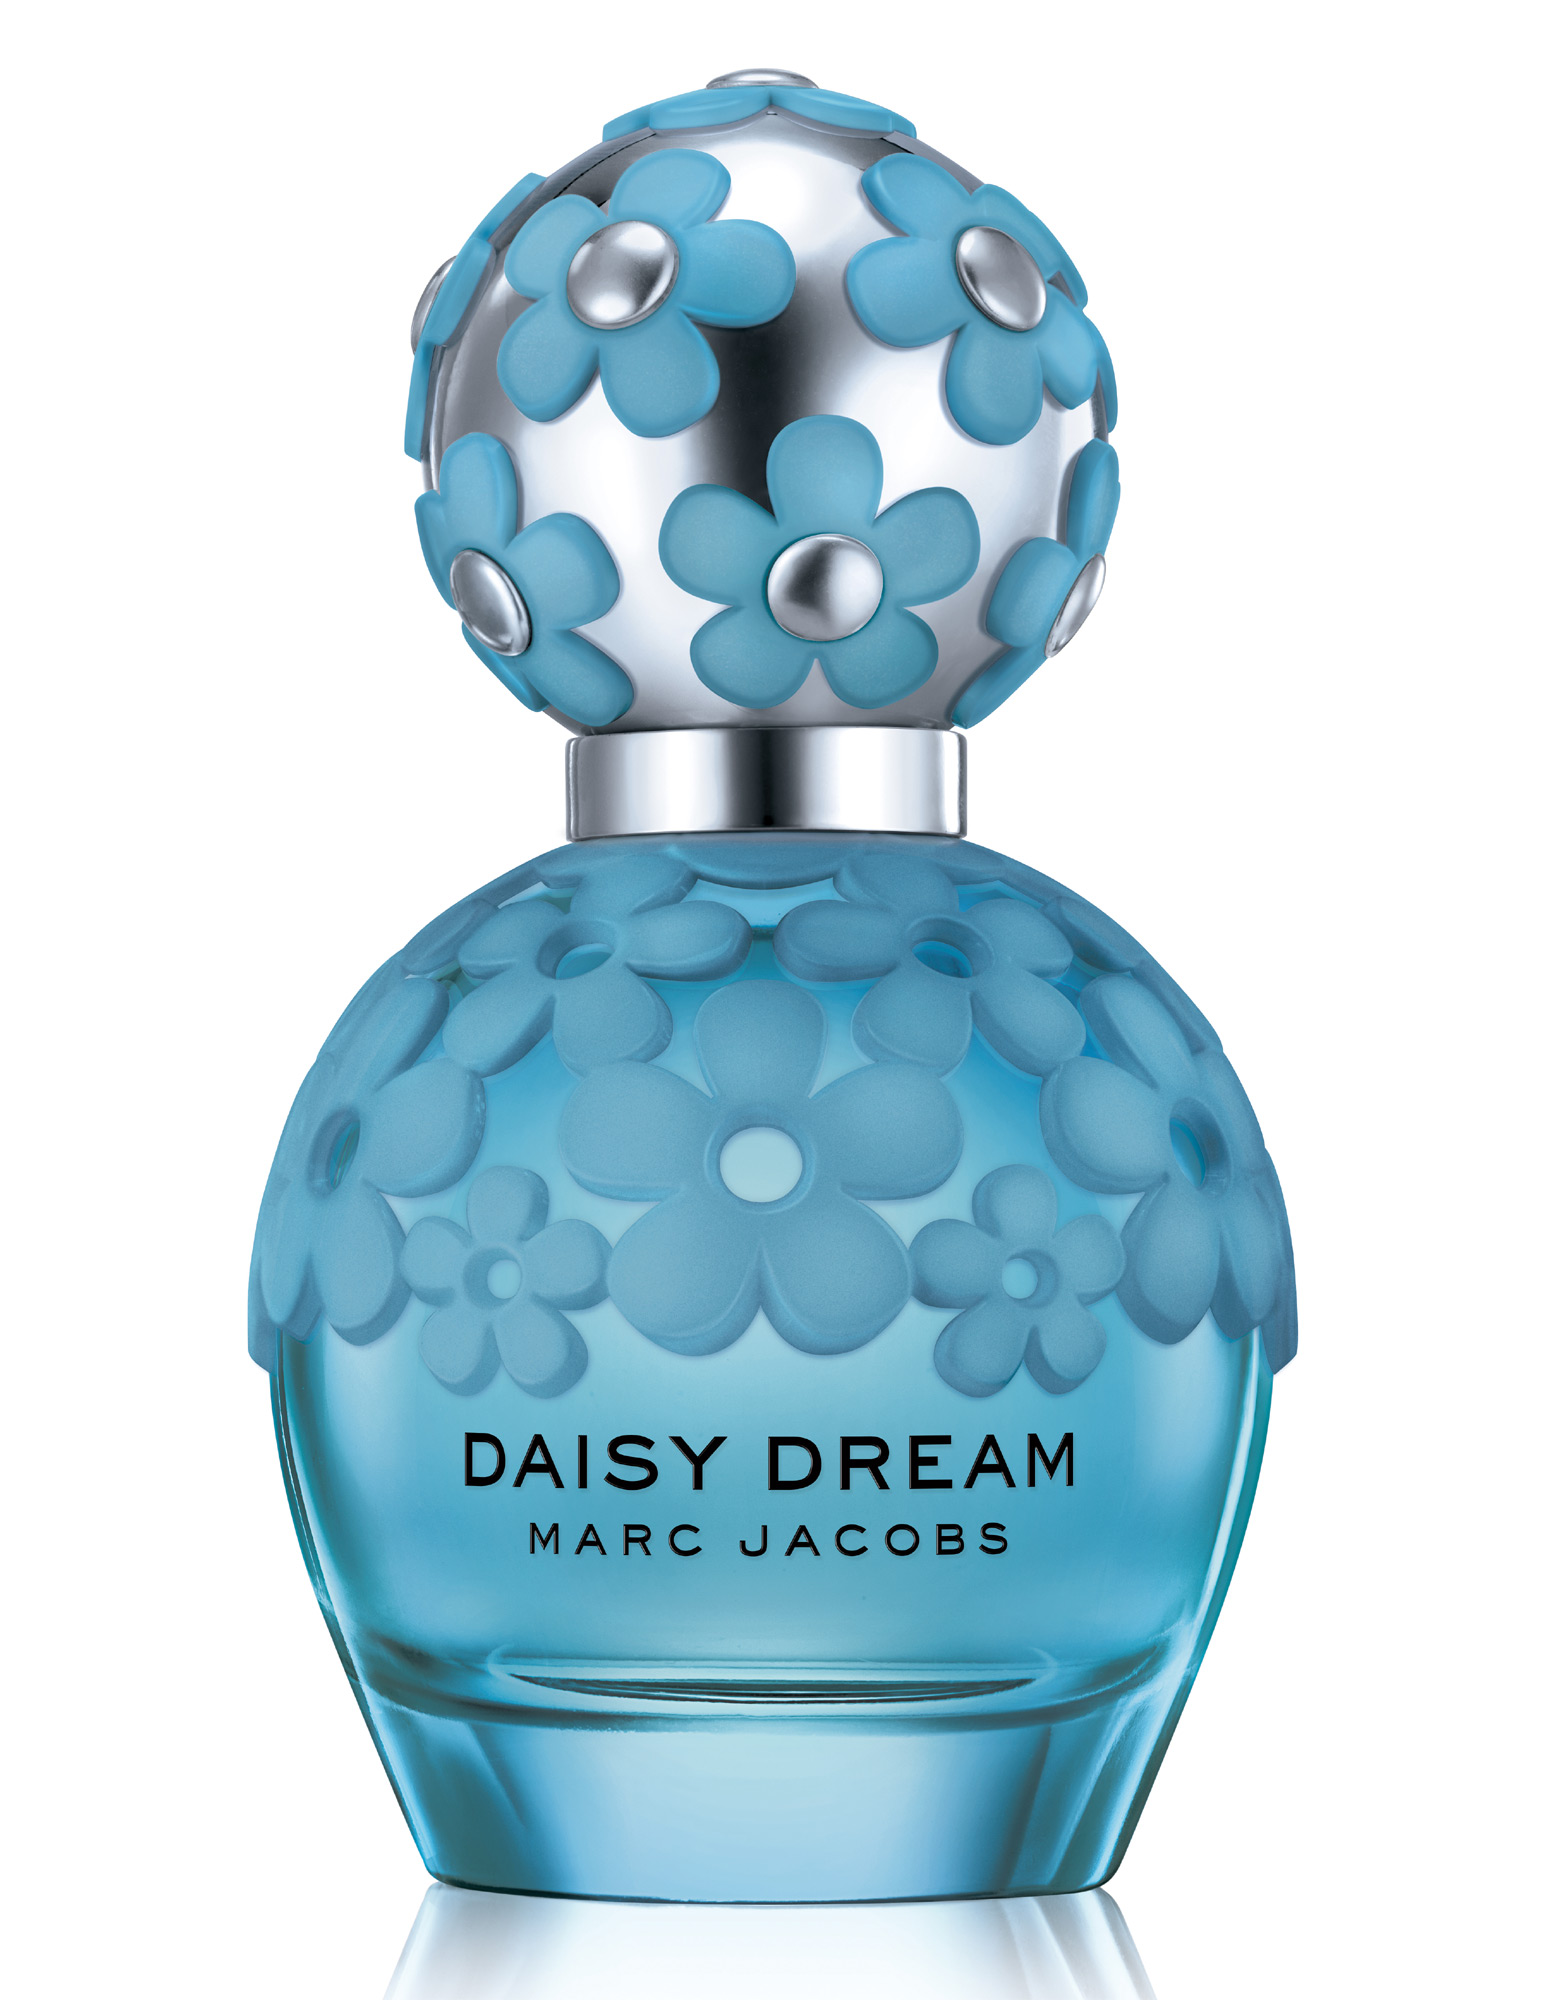 Daisy Dream Forever Marc Jacobs Perfume Una Fragancia Para Mujeres | My ...